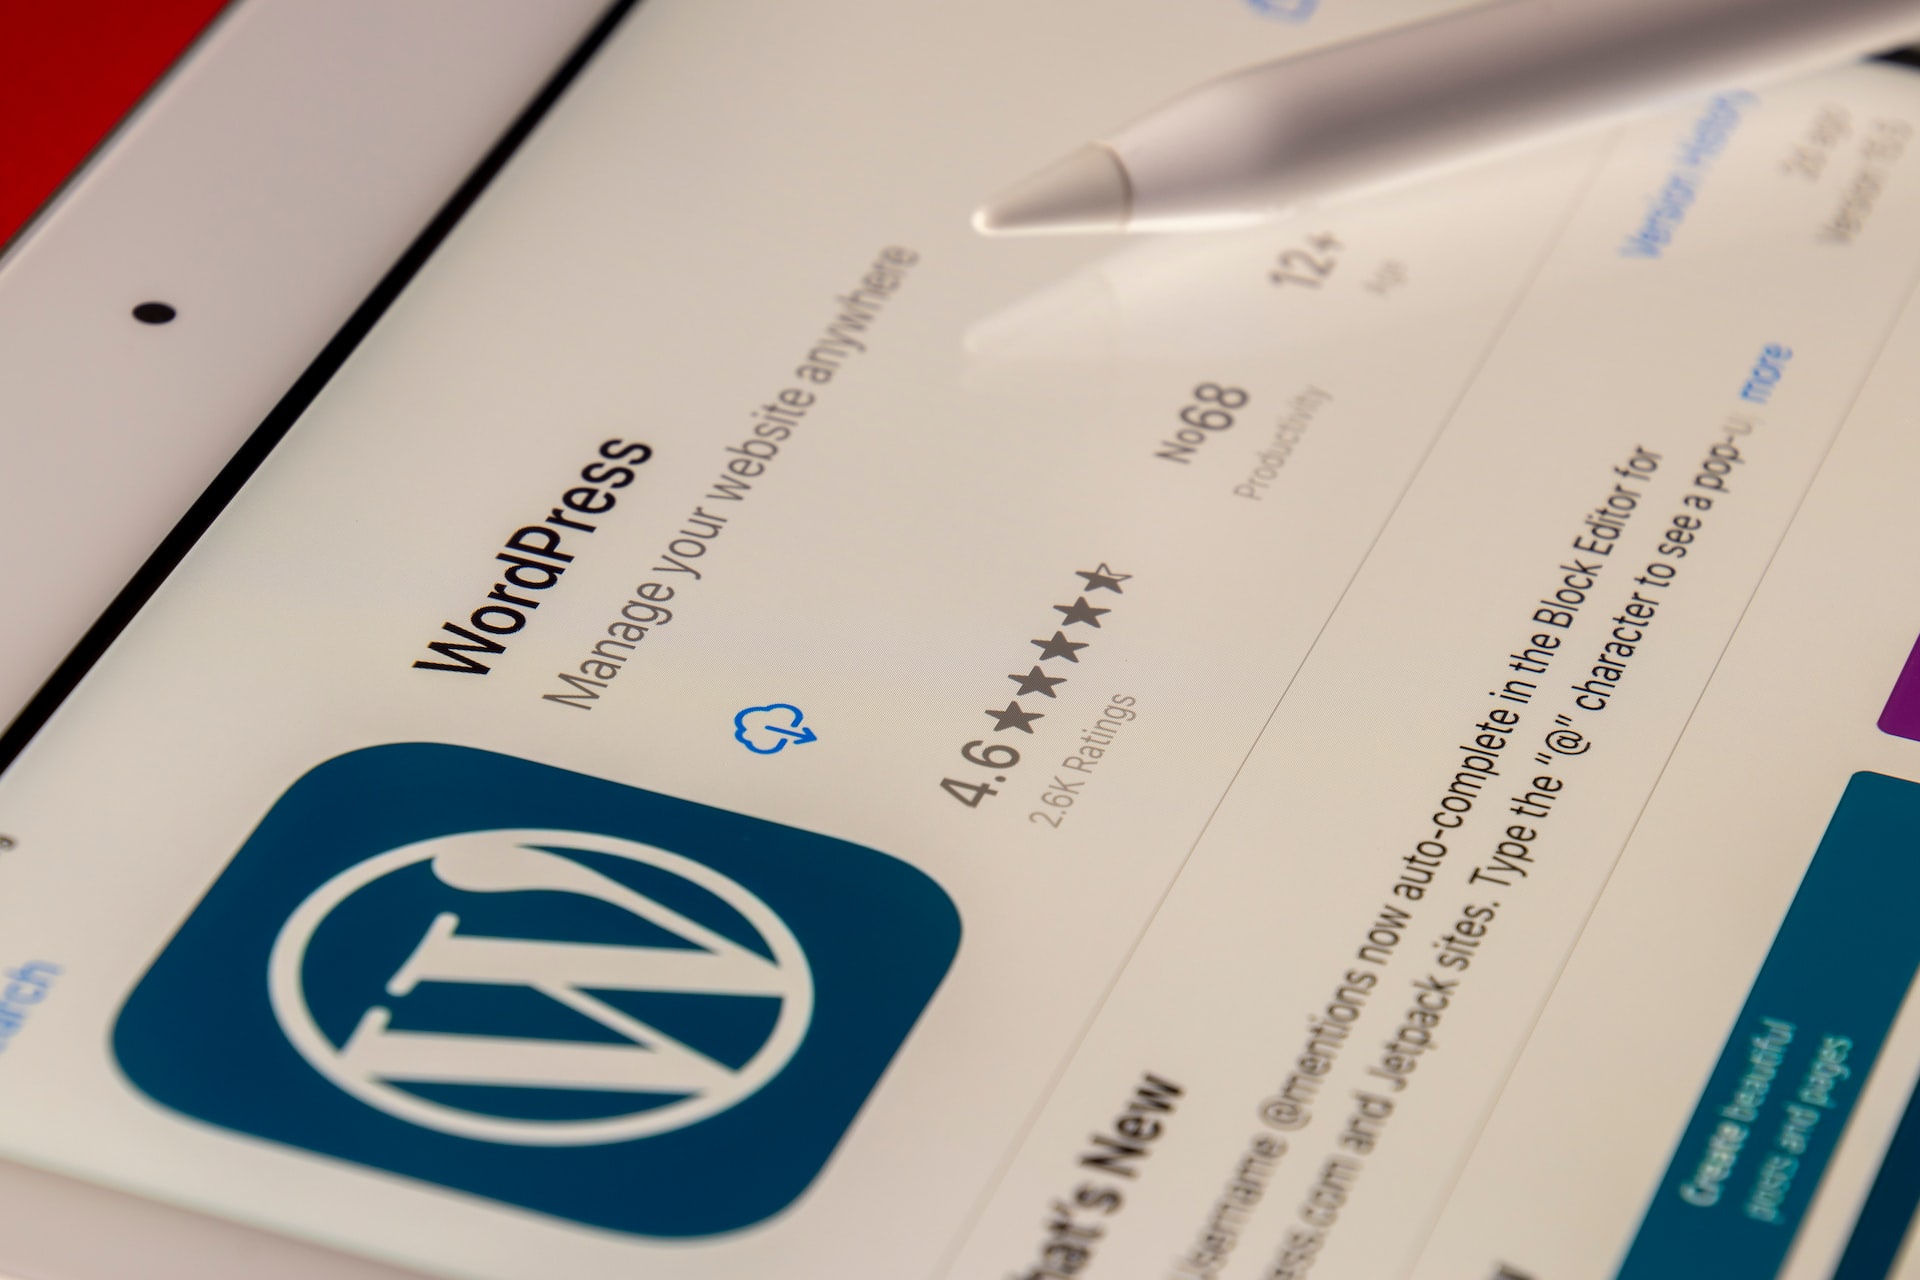 WordPress Theme Customization Tips For Small Businesses